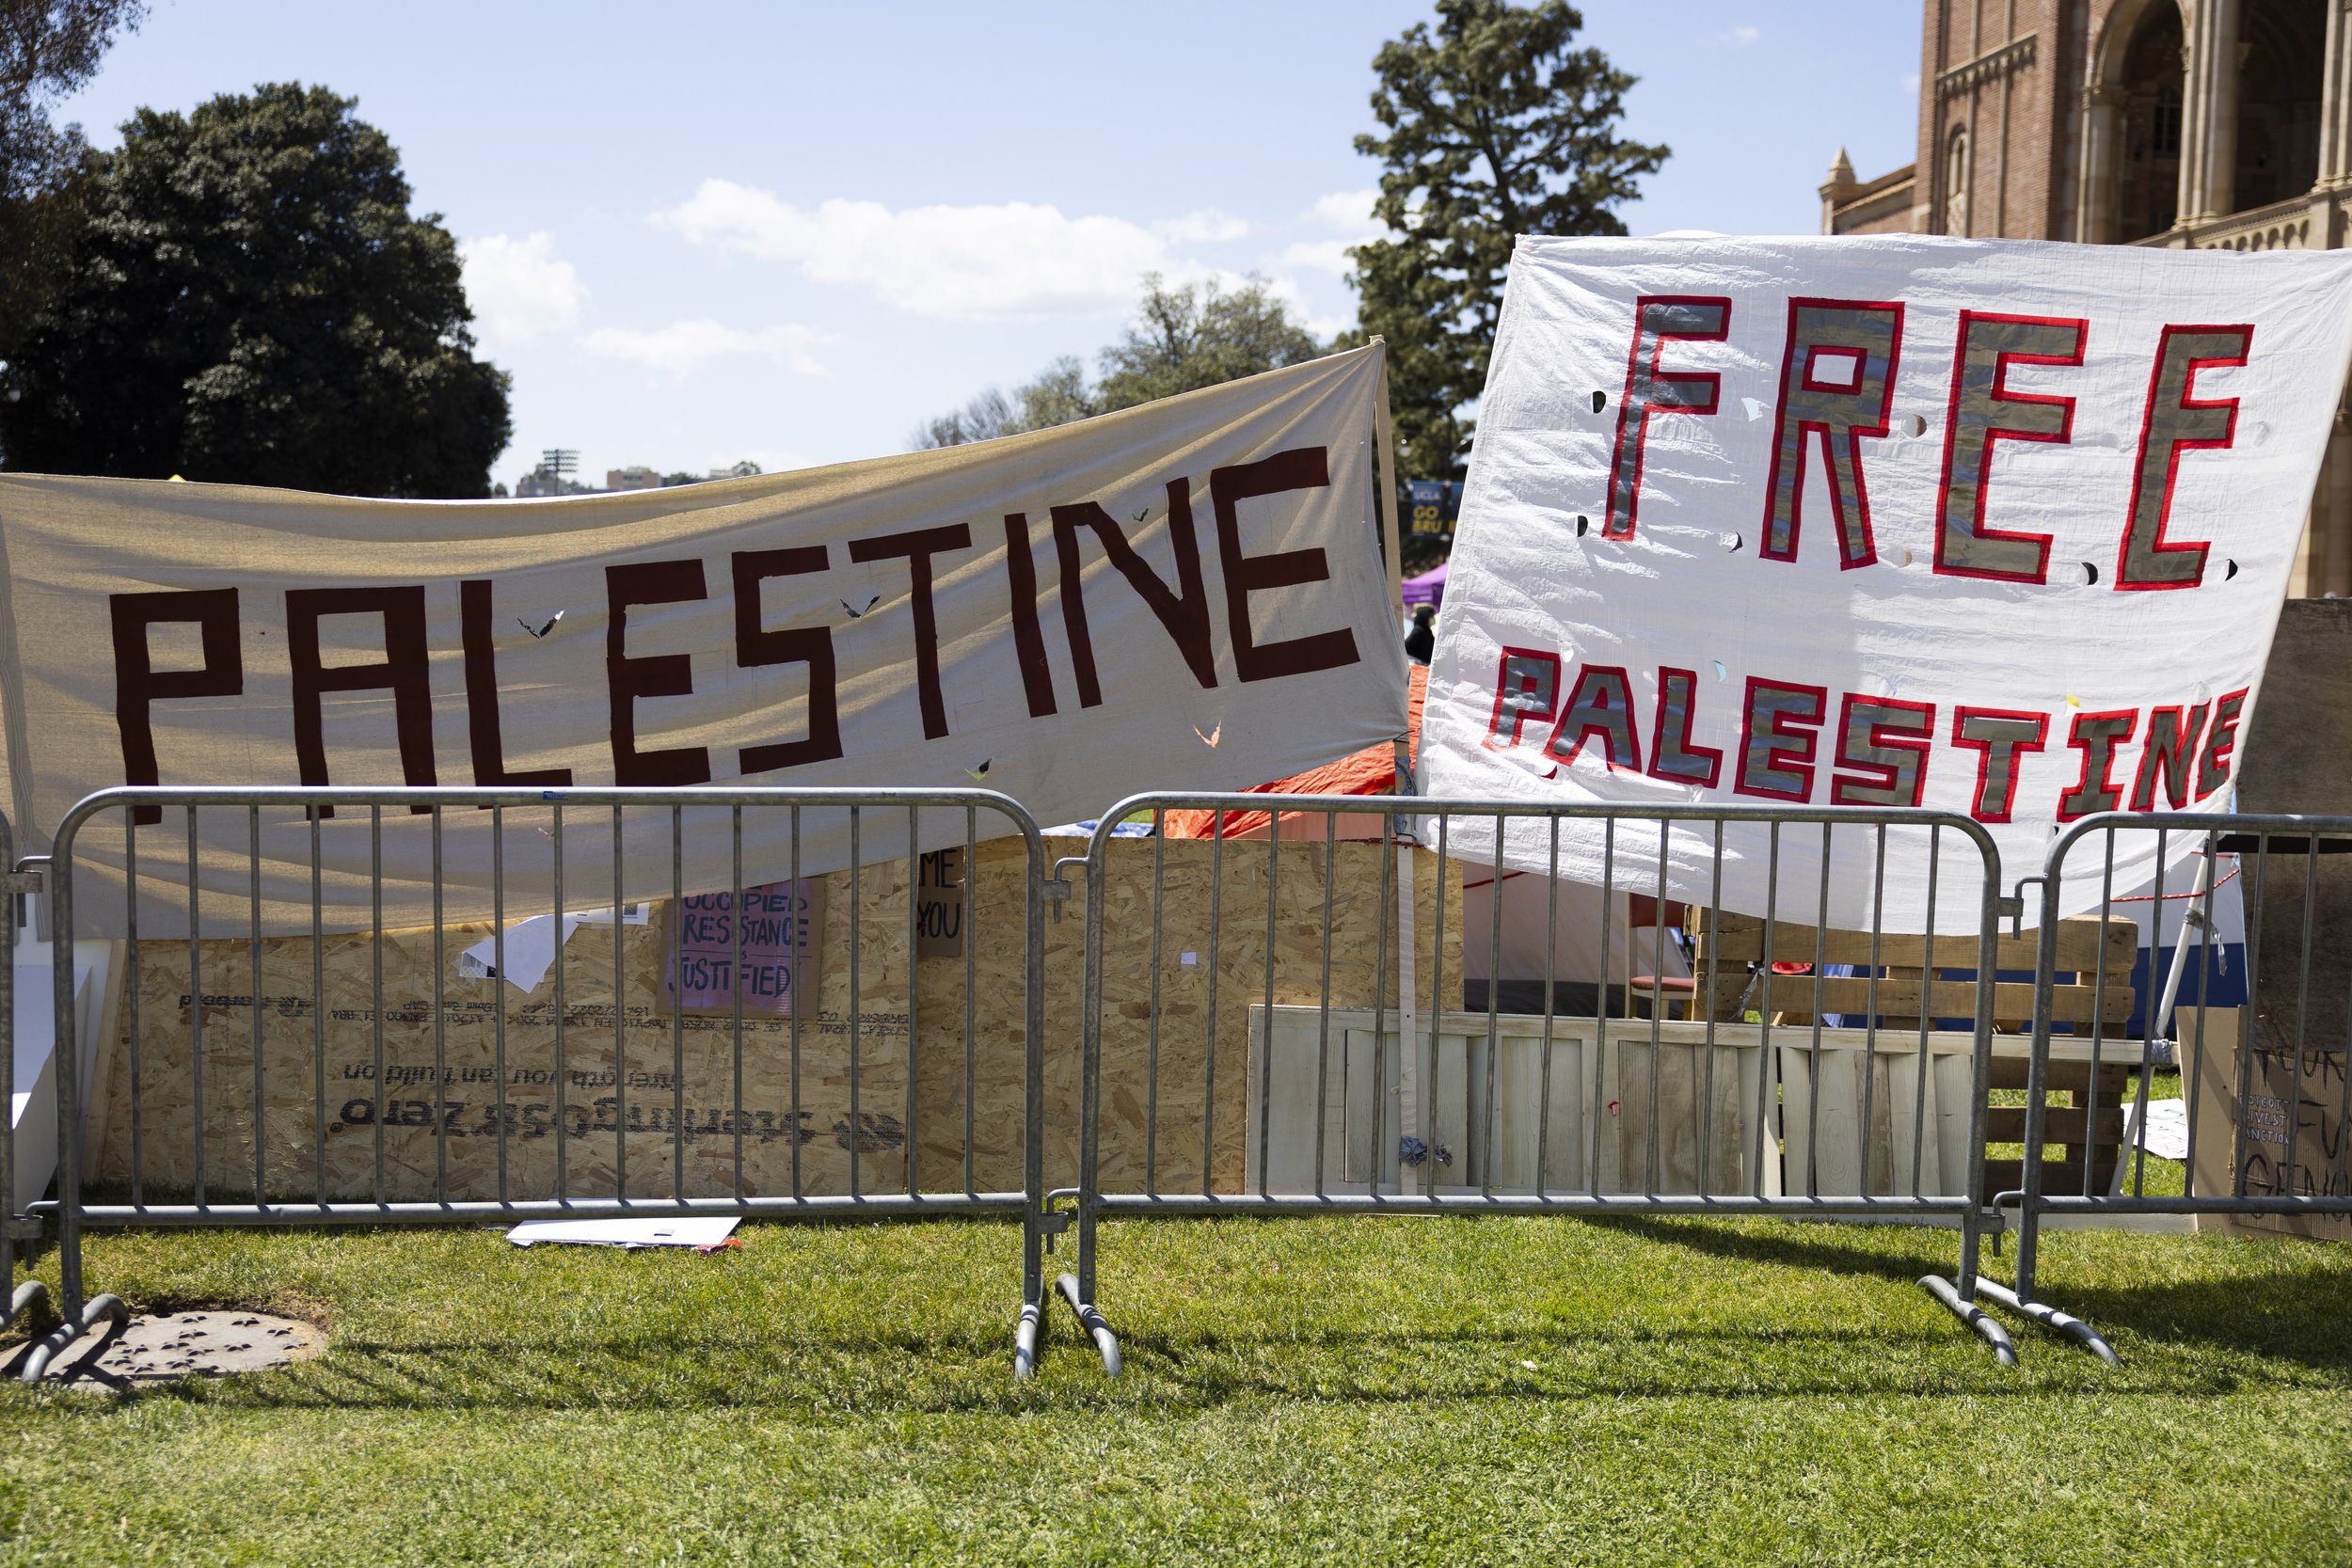  Students at University of California, Los Angeles camp outside Royce Hall in support of Palestine in the Israel-Palestine war and in solidarity with other college students who were arrested for similar protests in Los Angeles, Calif., on Friday, Apr